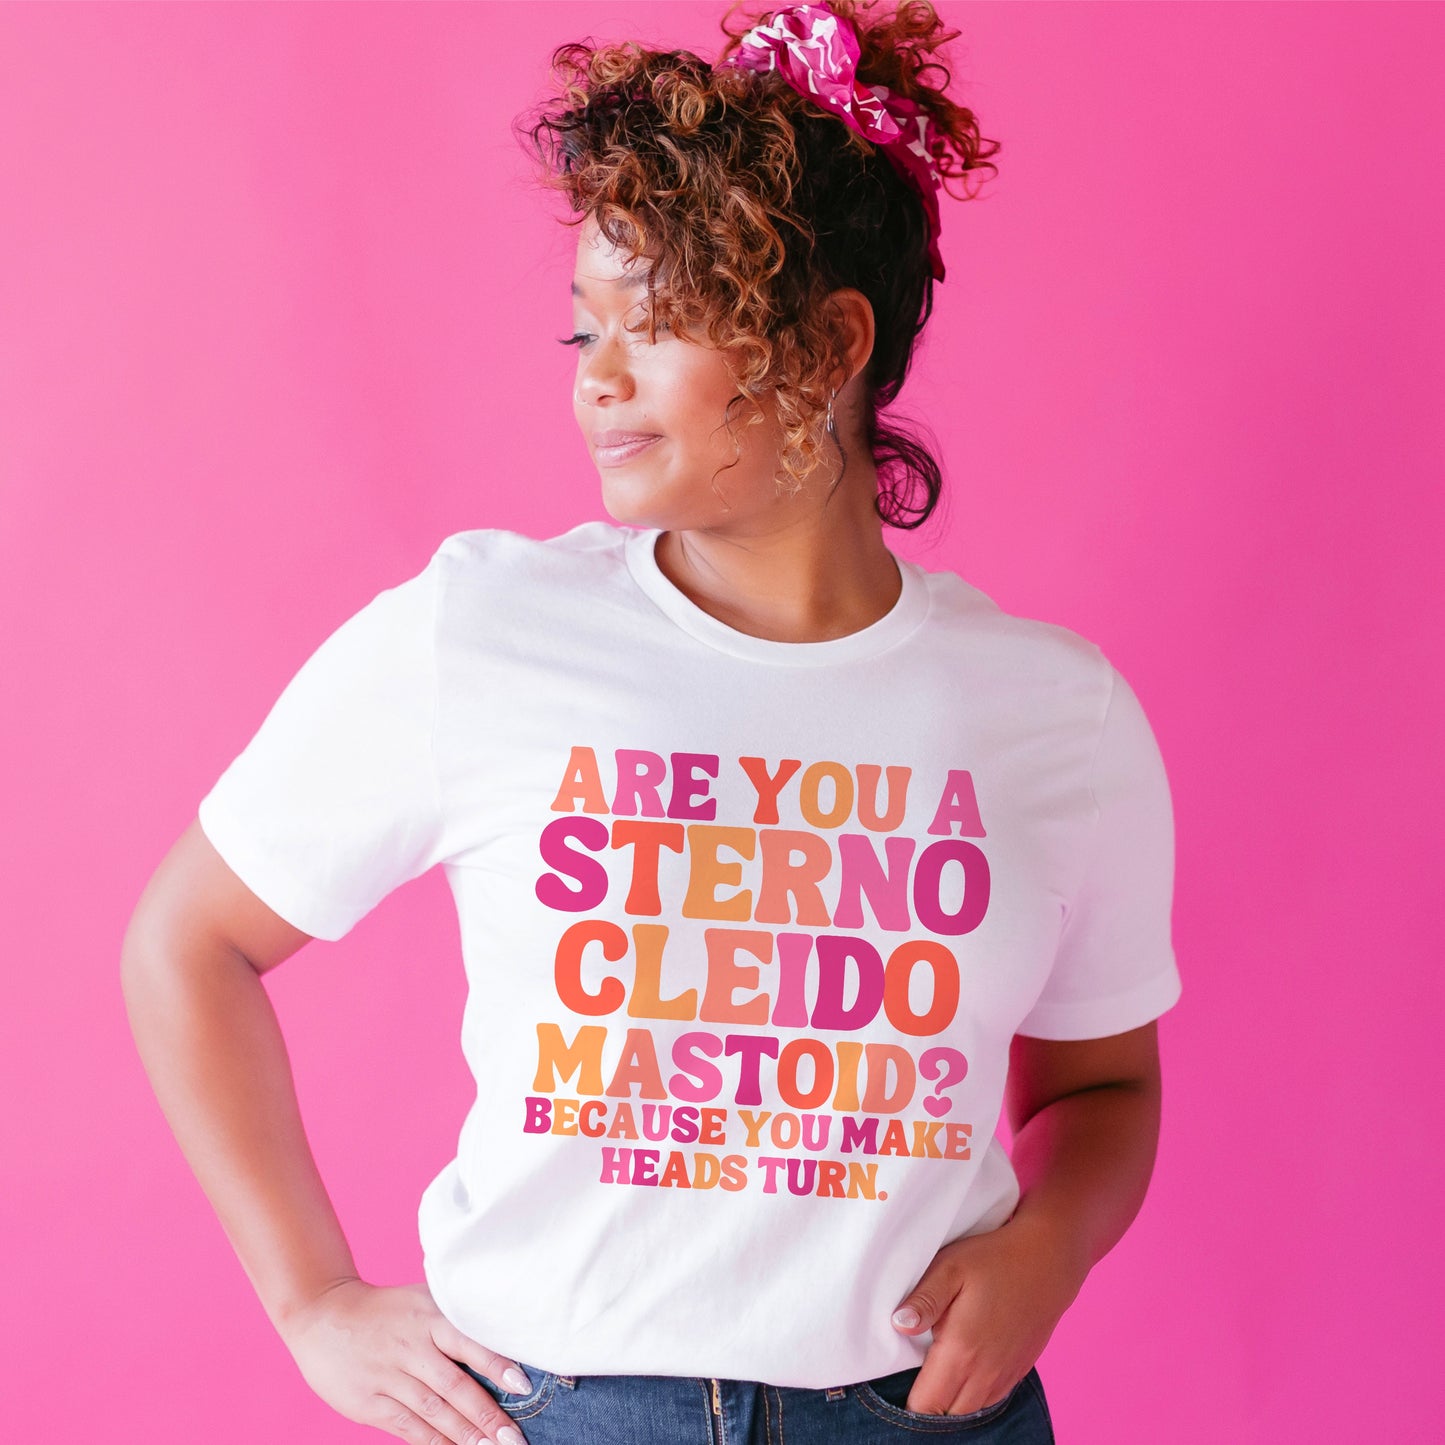 Are You A Sternocleidomastoid Tee